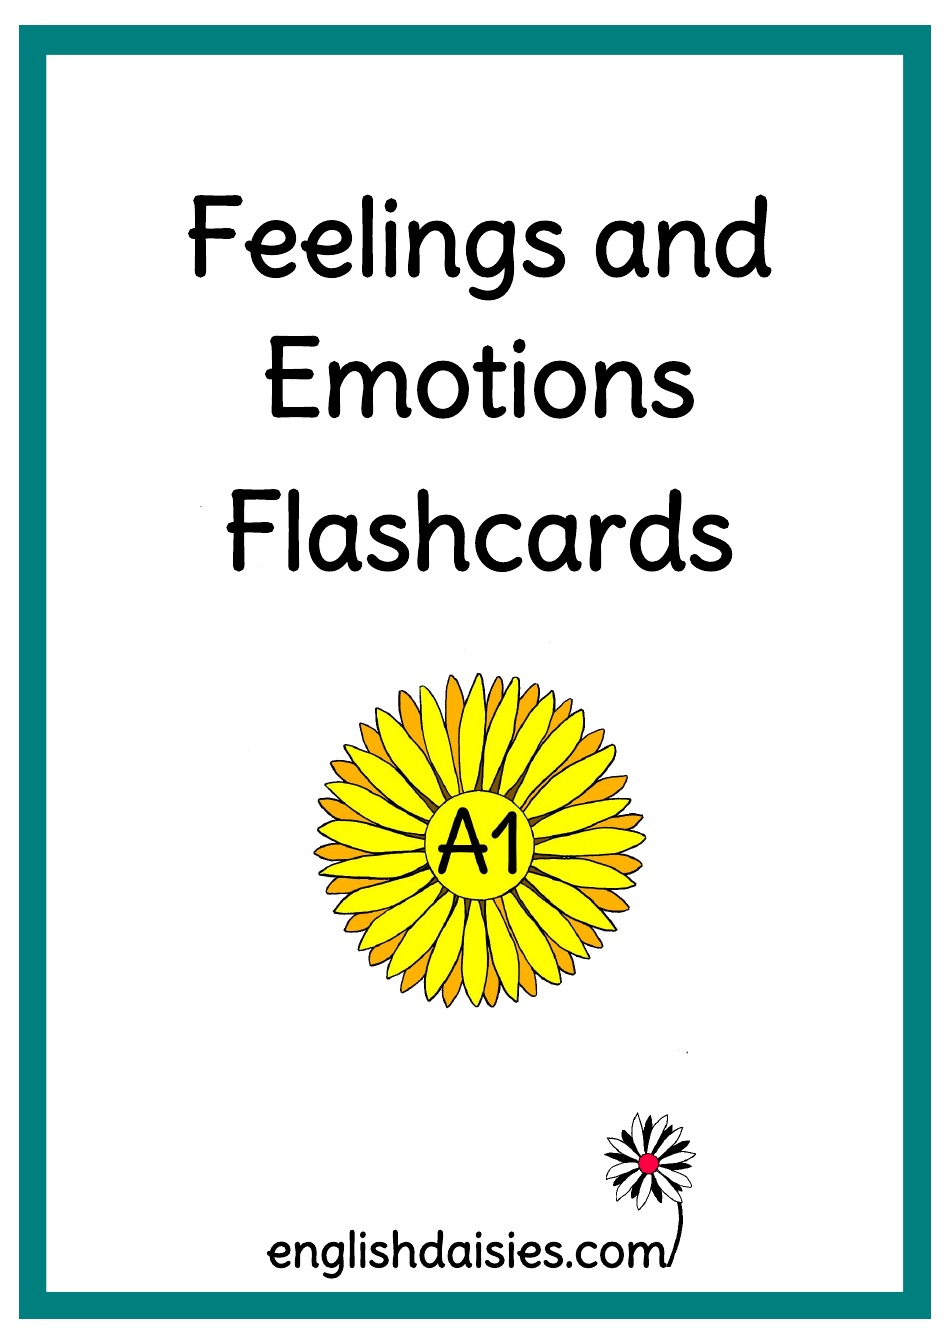 Feelings and Emotions Flashcards, Page 1